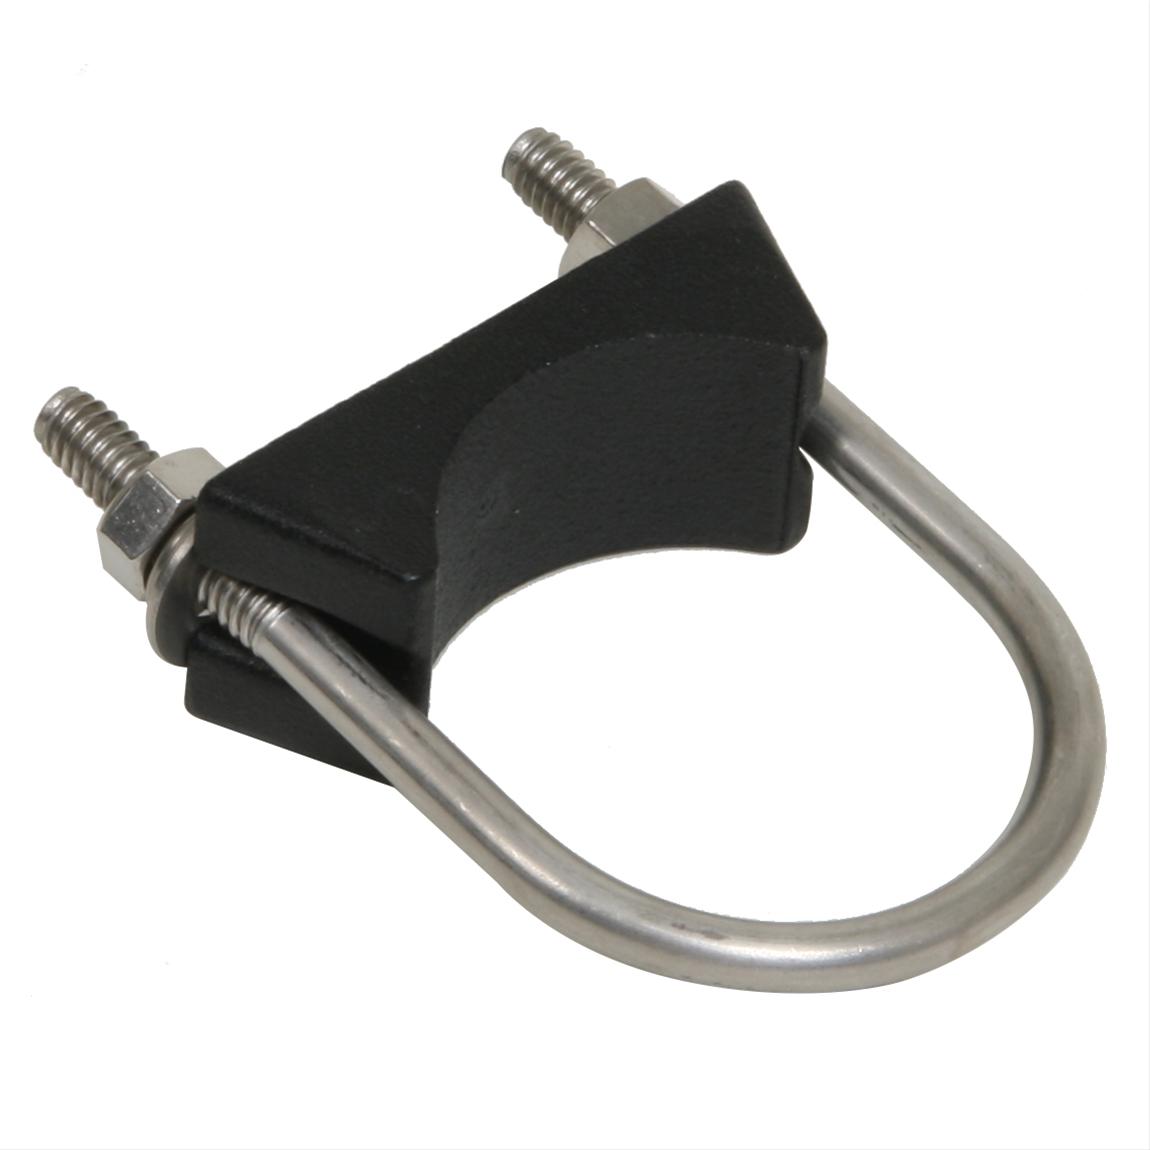 DX Engineering DXE-PSAD-175A DX Engineering Saddle Clamps | DX Engineering